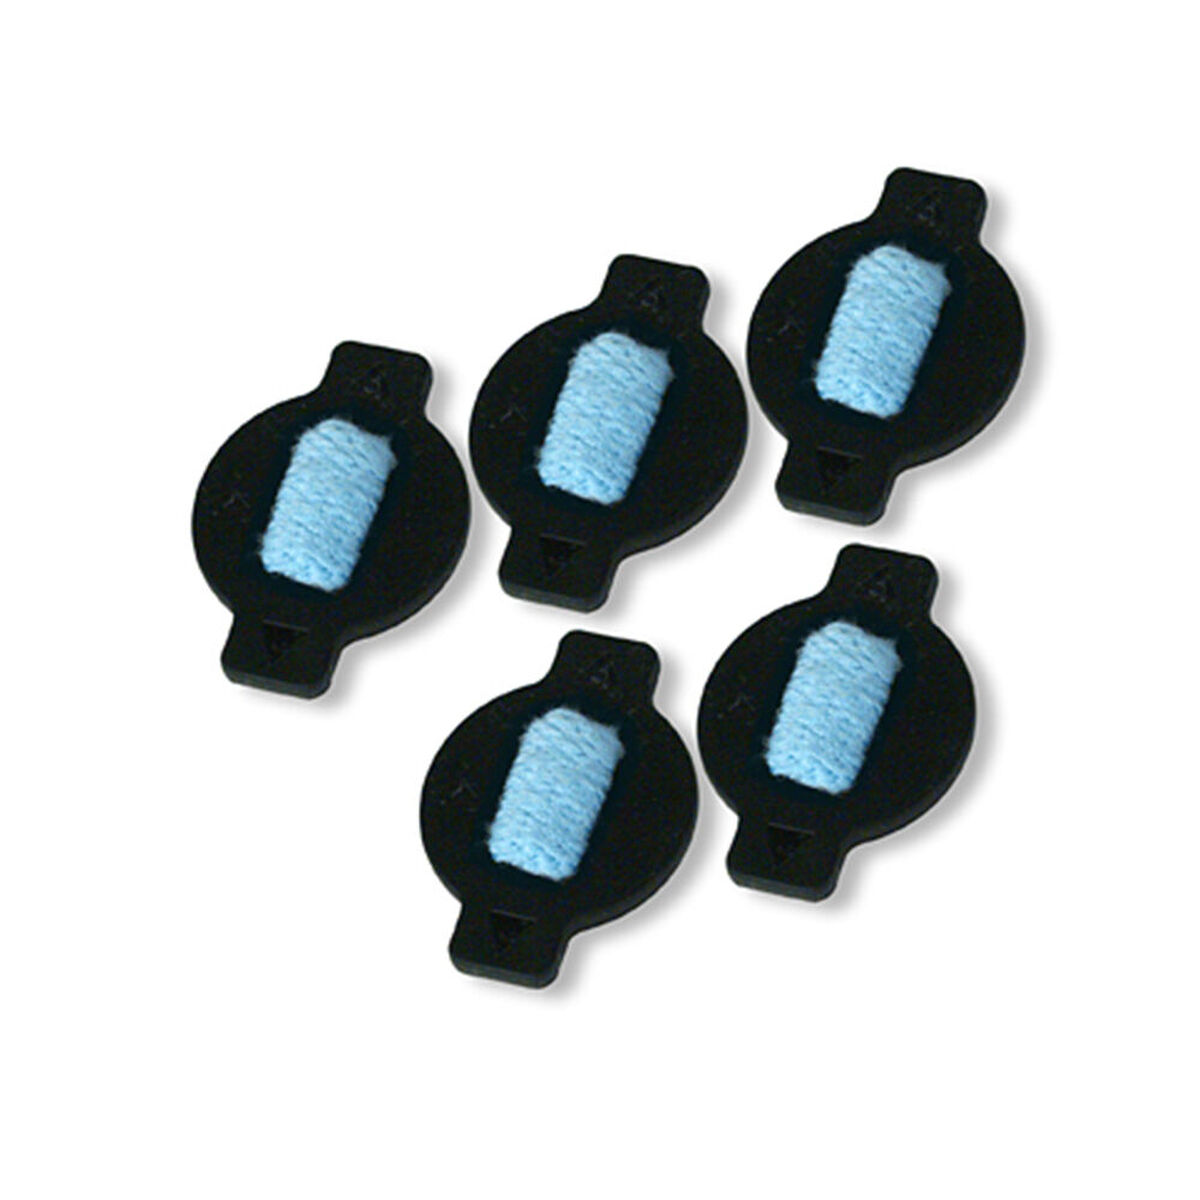 5-Pack Wick Cap Replacement For Pro-Clean System, , large image number 0